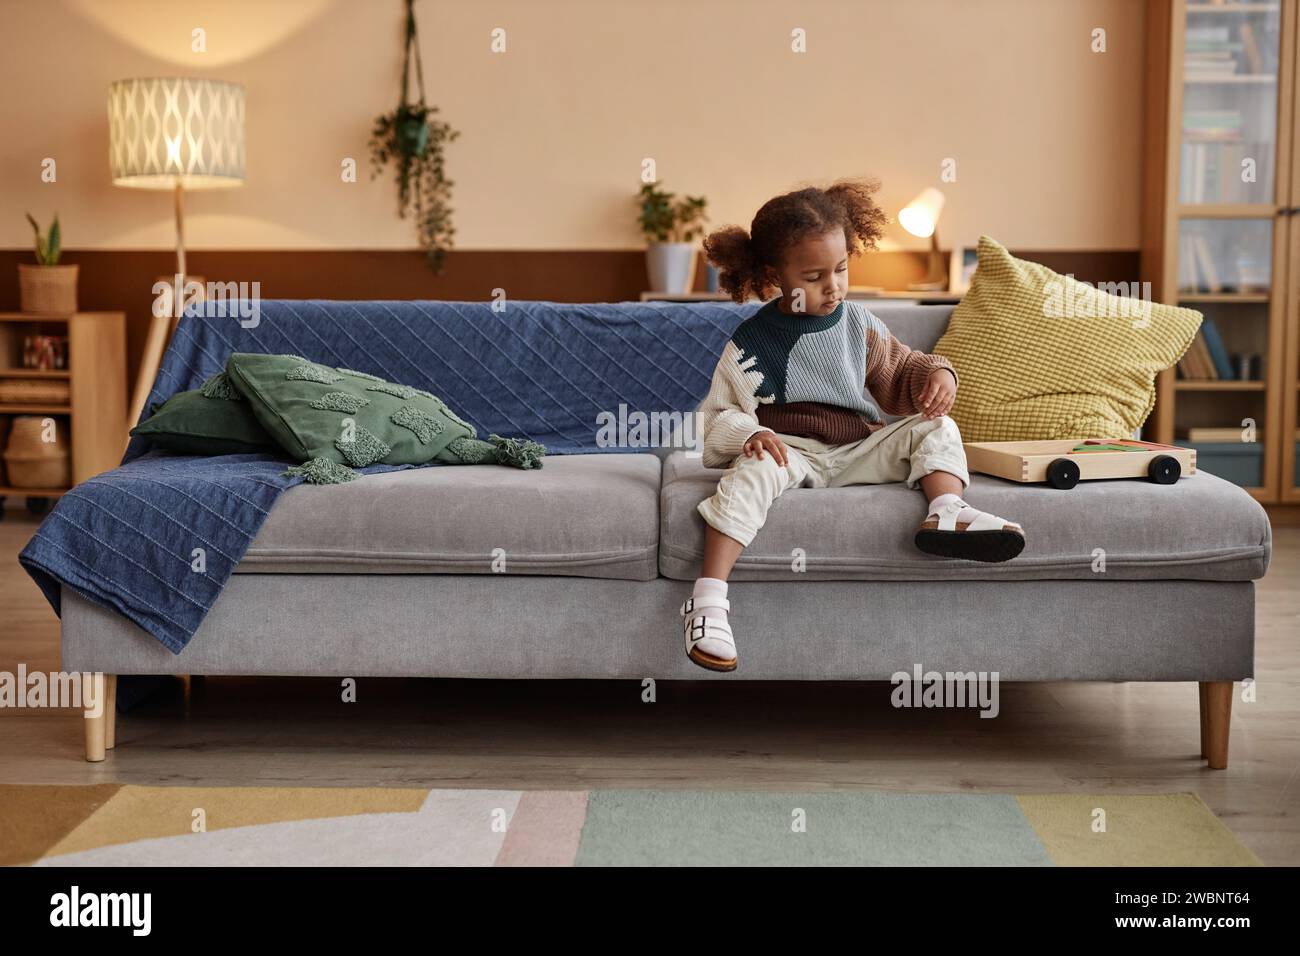 Little Girl Sitting on Sofa at Home Stock Photo